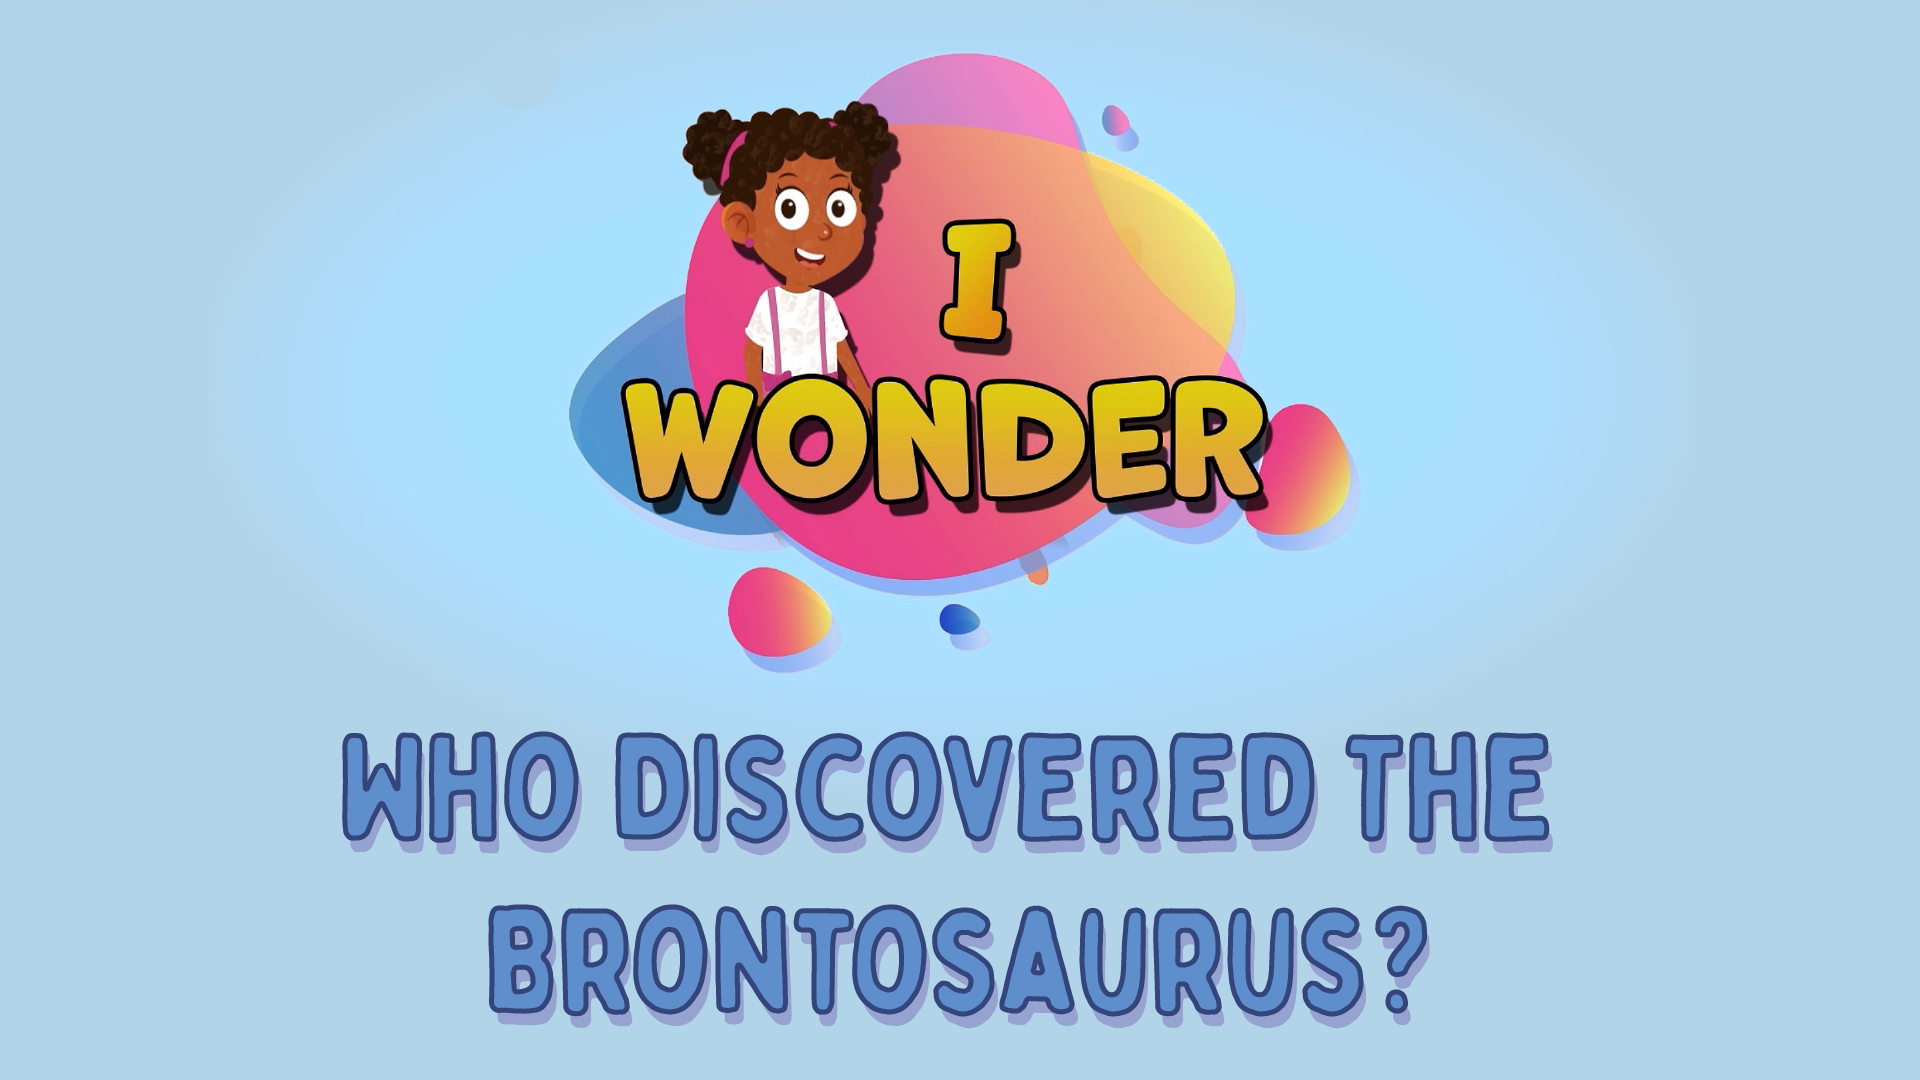 Who Discovered The Brontosaurus?